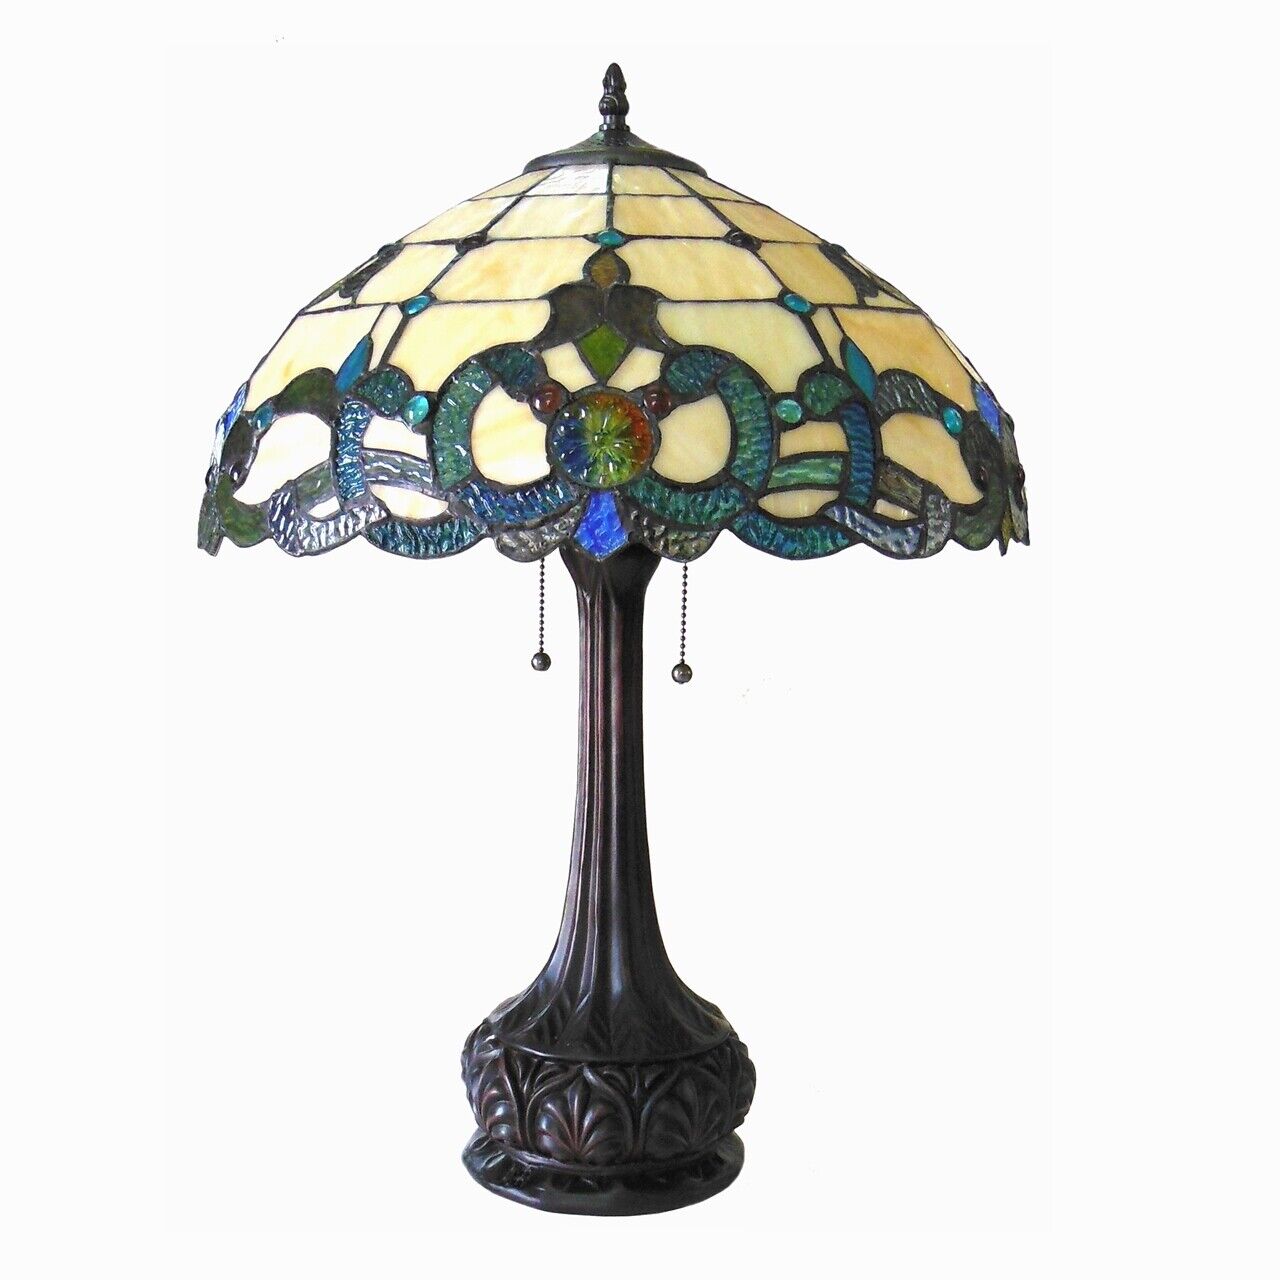 25" Antique Vintage Style Stained Glass Table Lamp